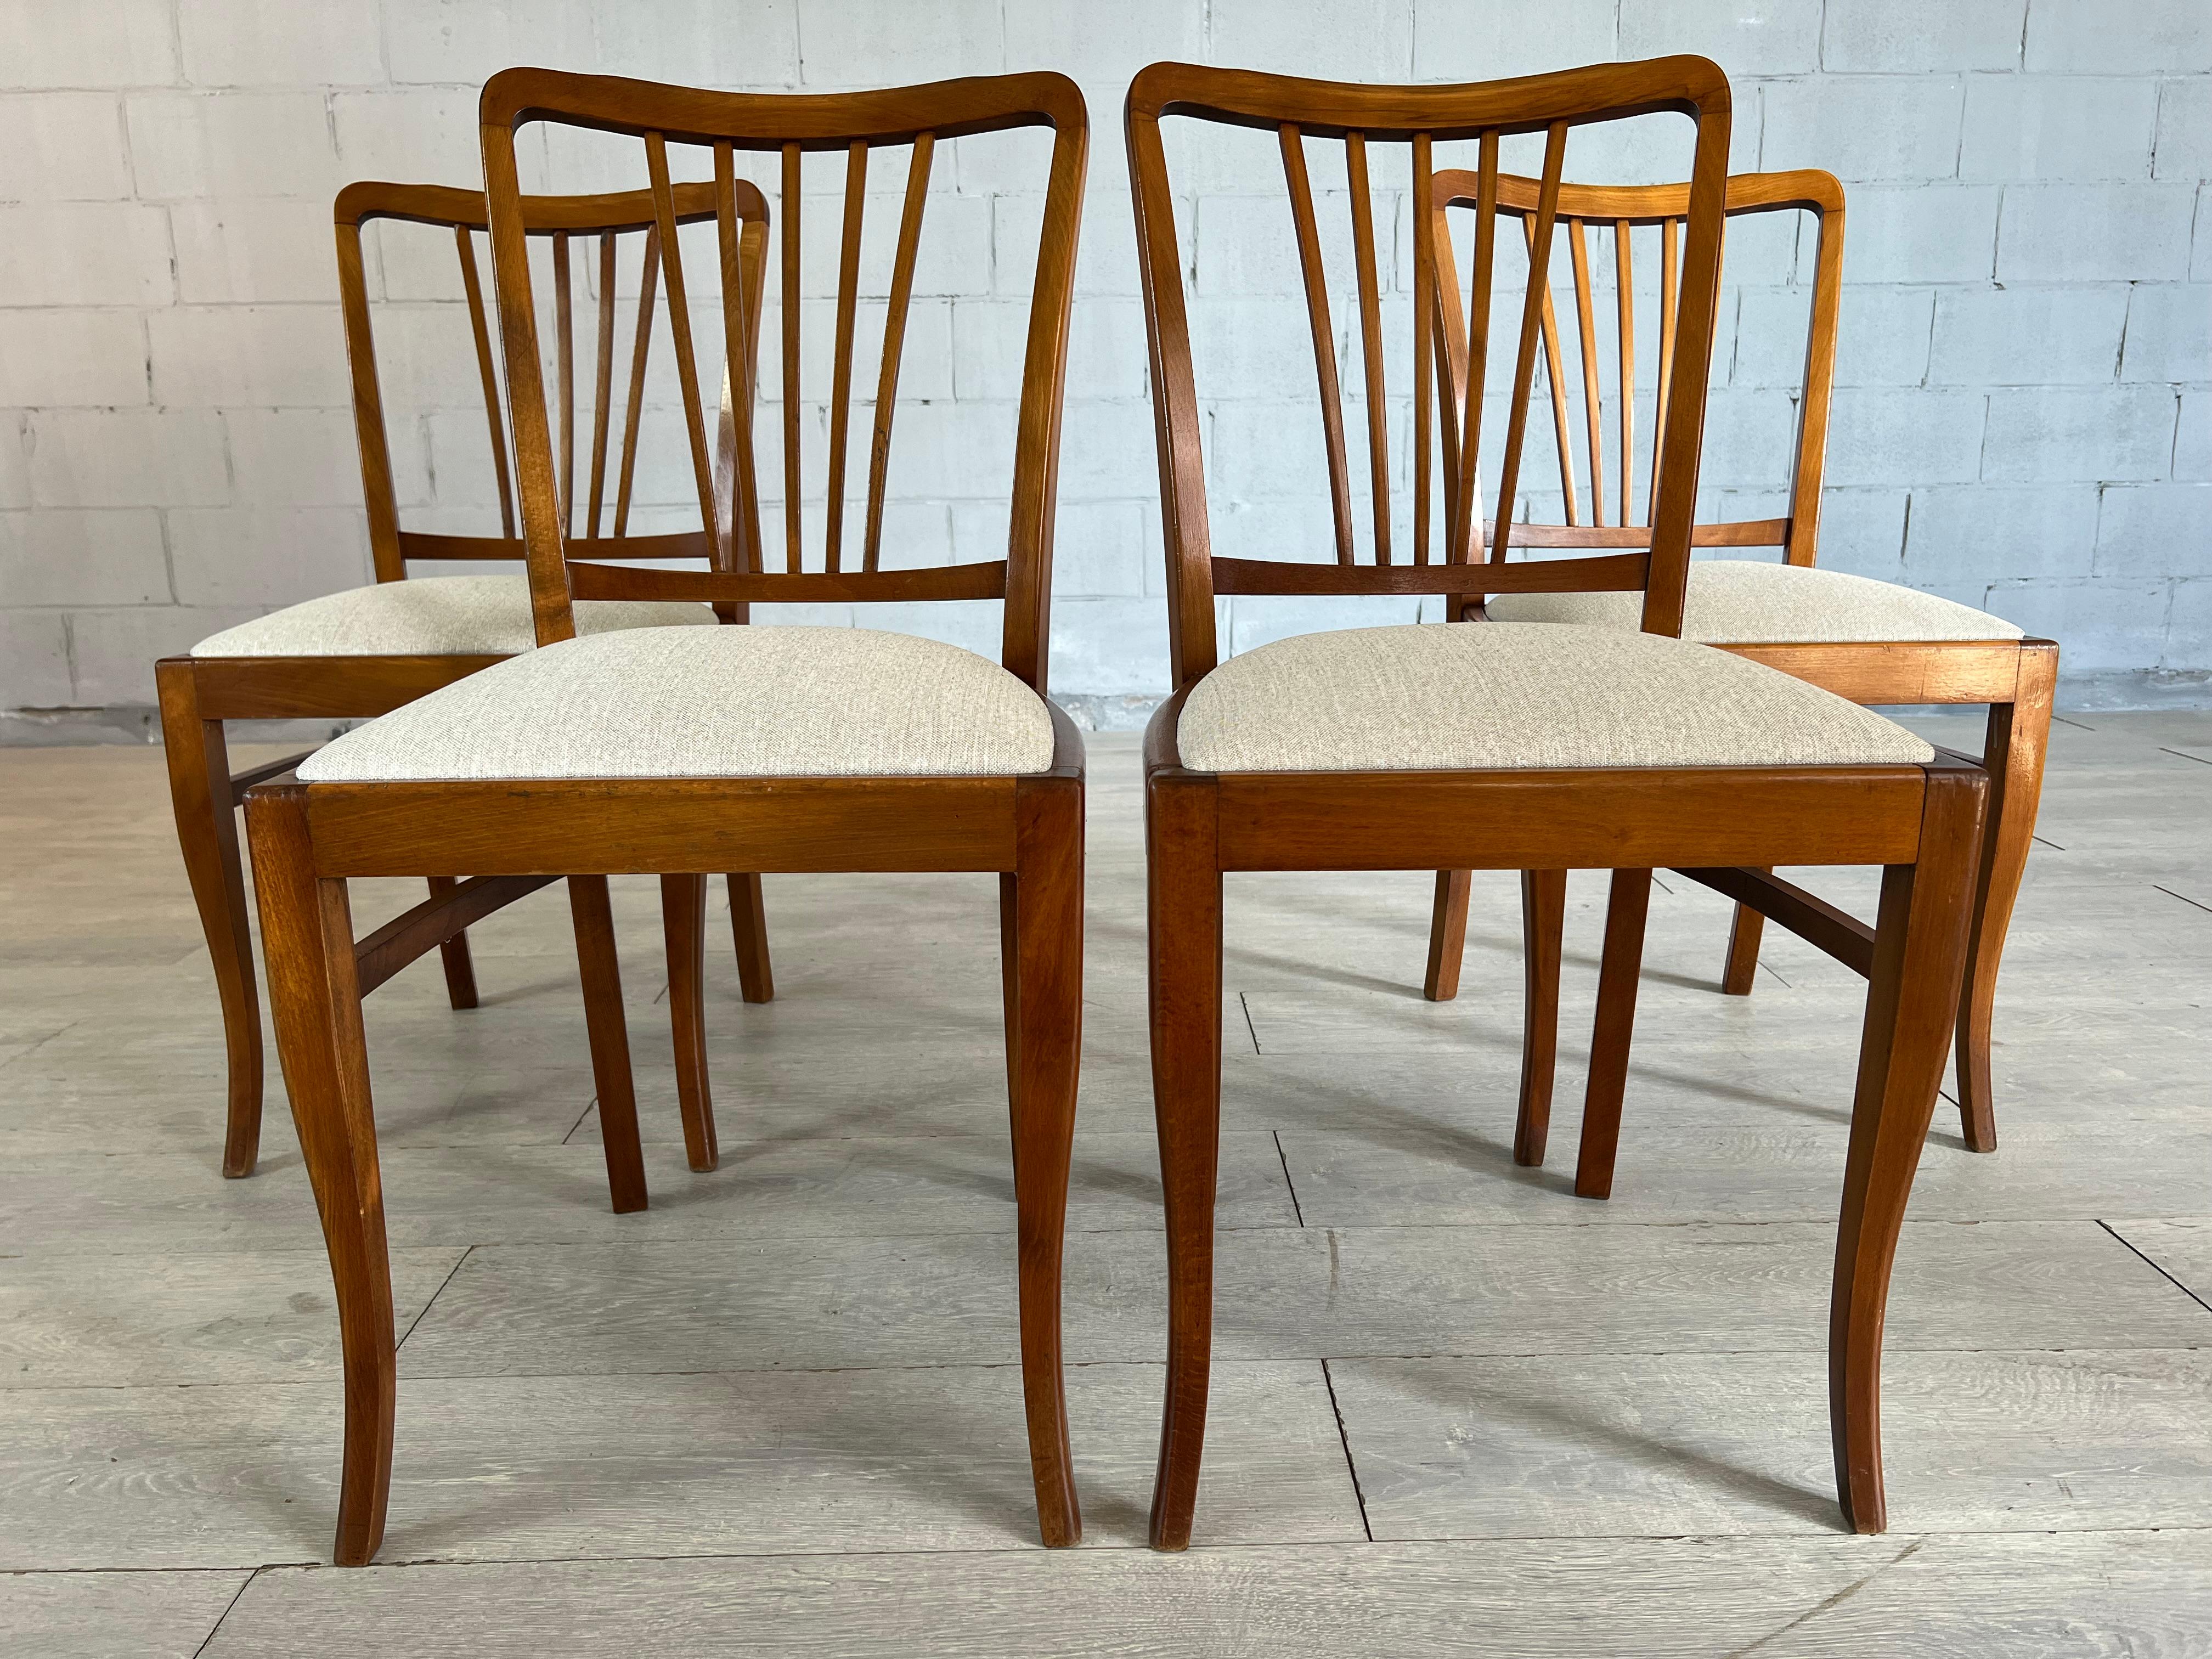 French Country Splat Back Dining Chairs, Reupholstered - Set of 4 In Good Condition For Sale In Bridgeport, CT